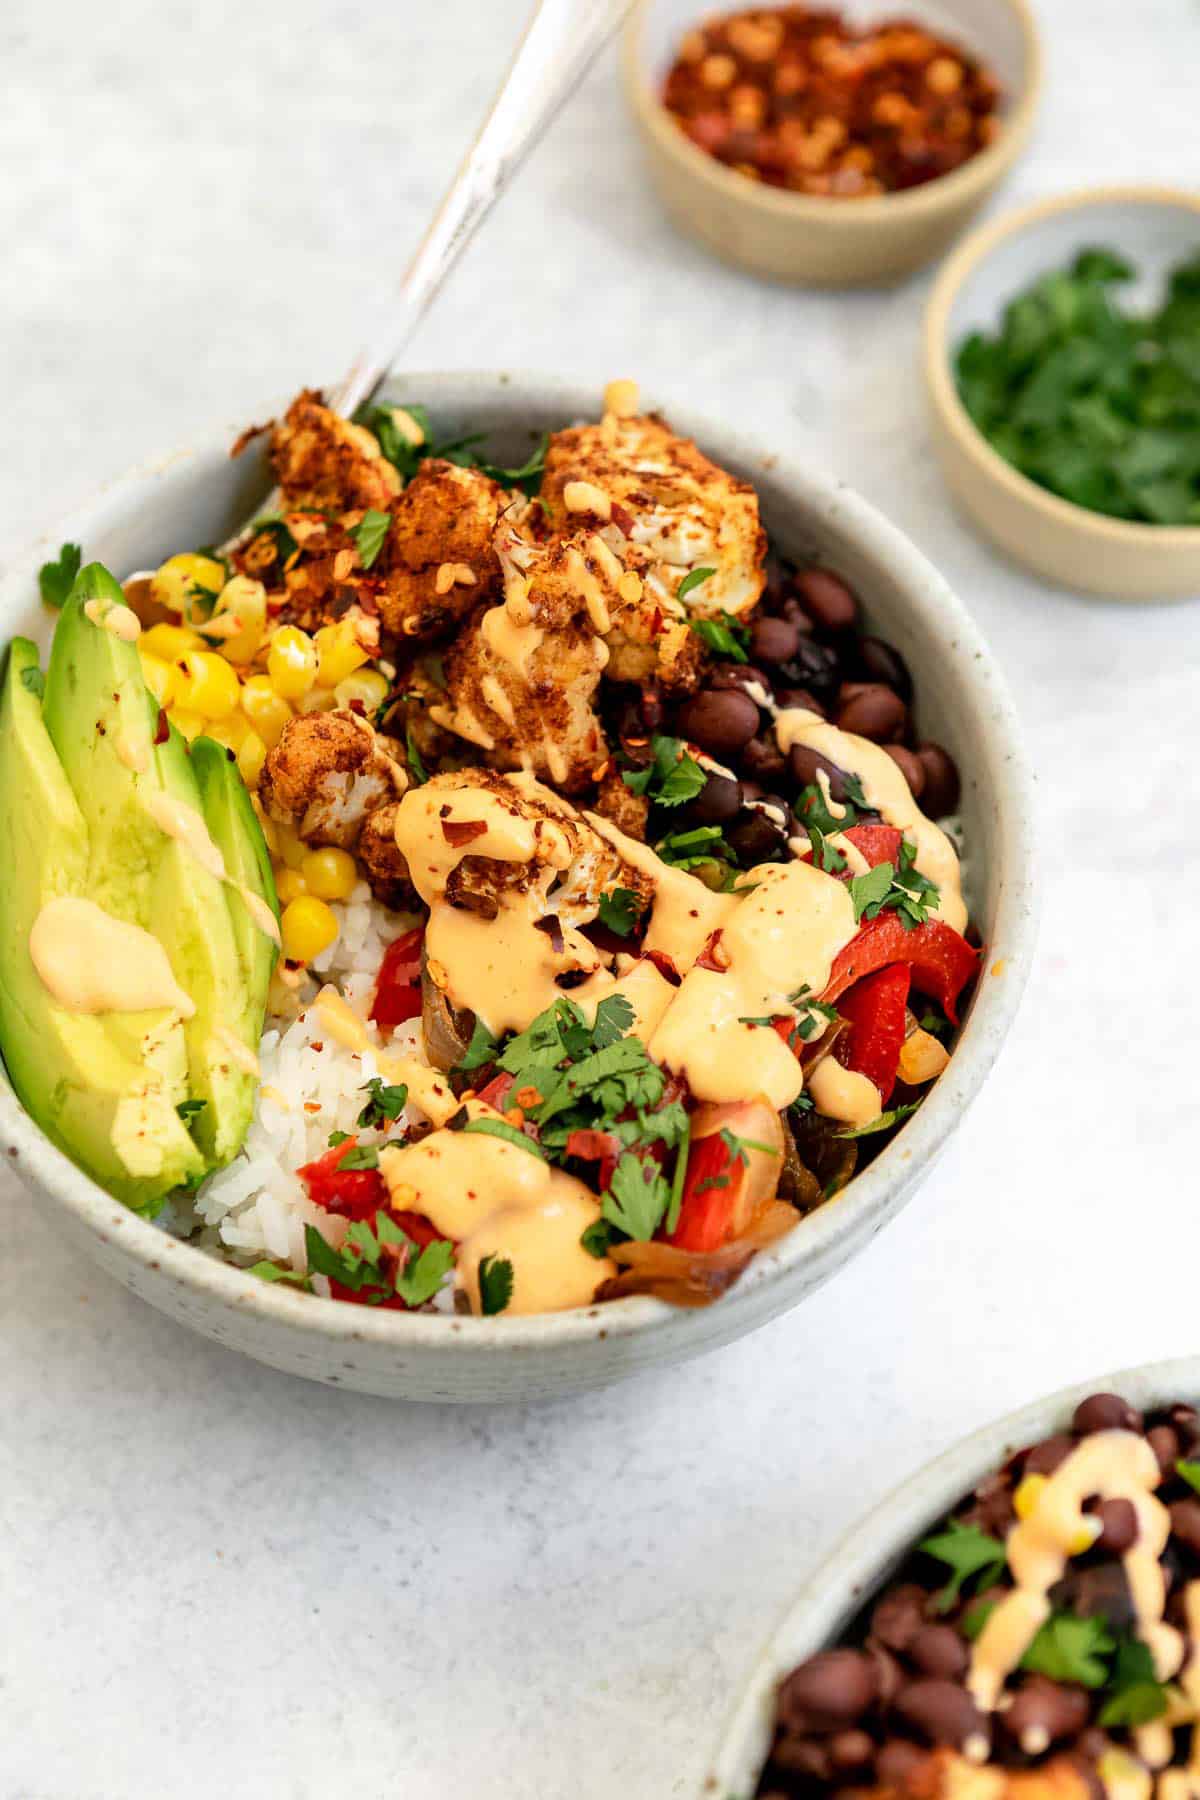 angled view of the vegan burrito bowl with bell peppers and roasted cauliflower